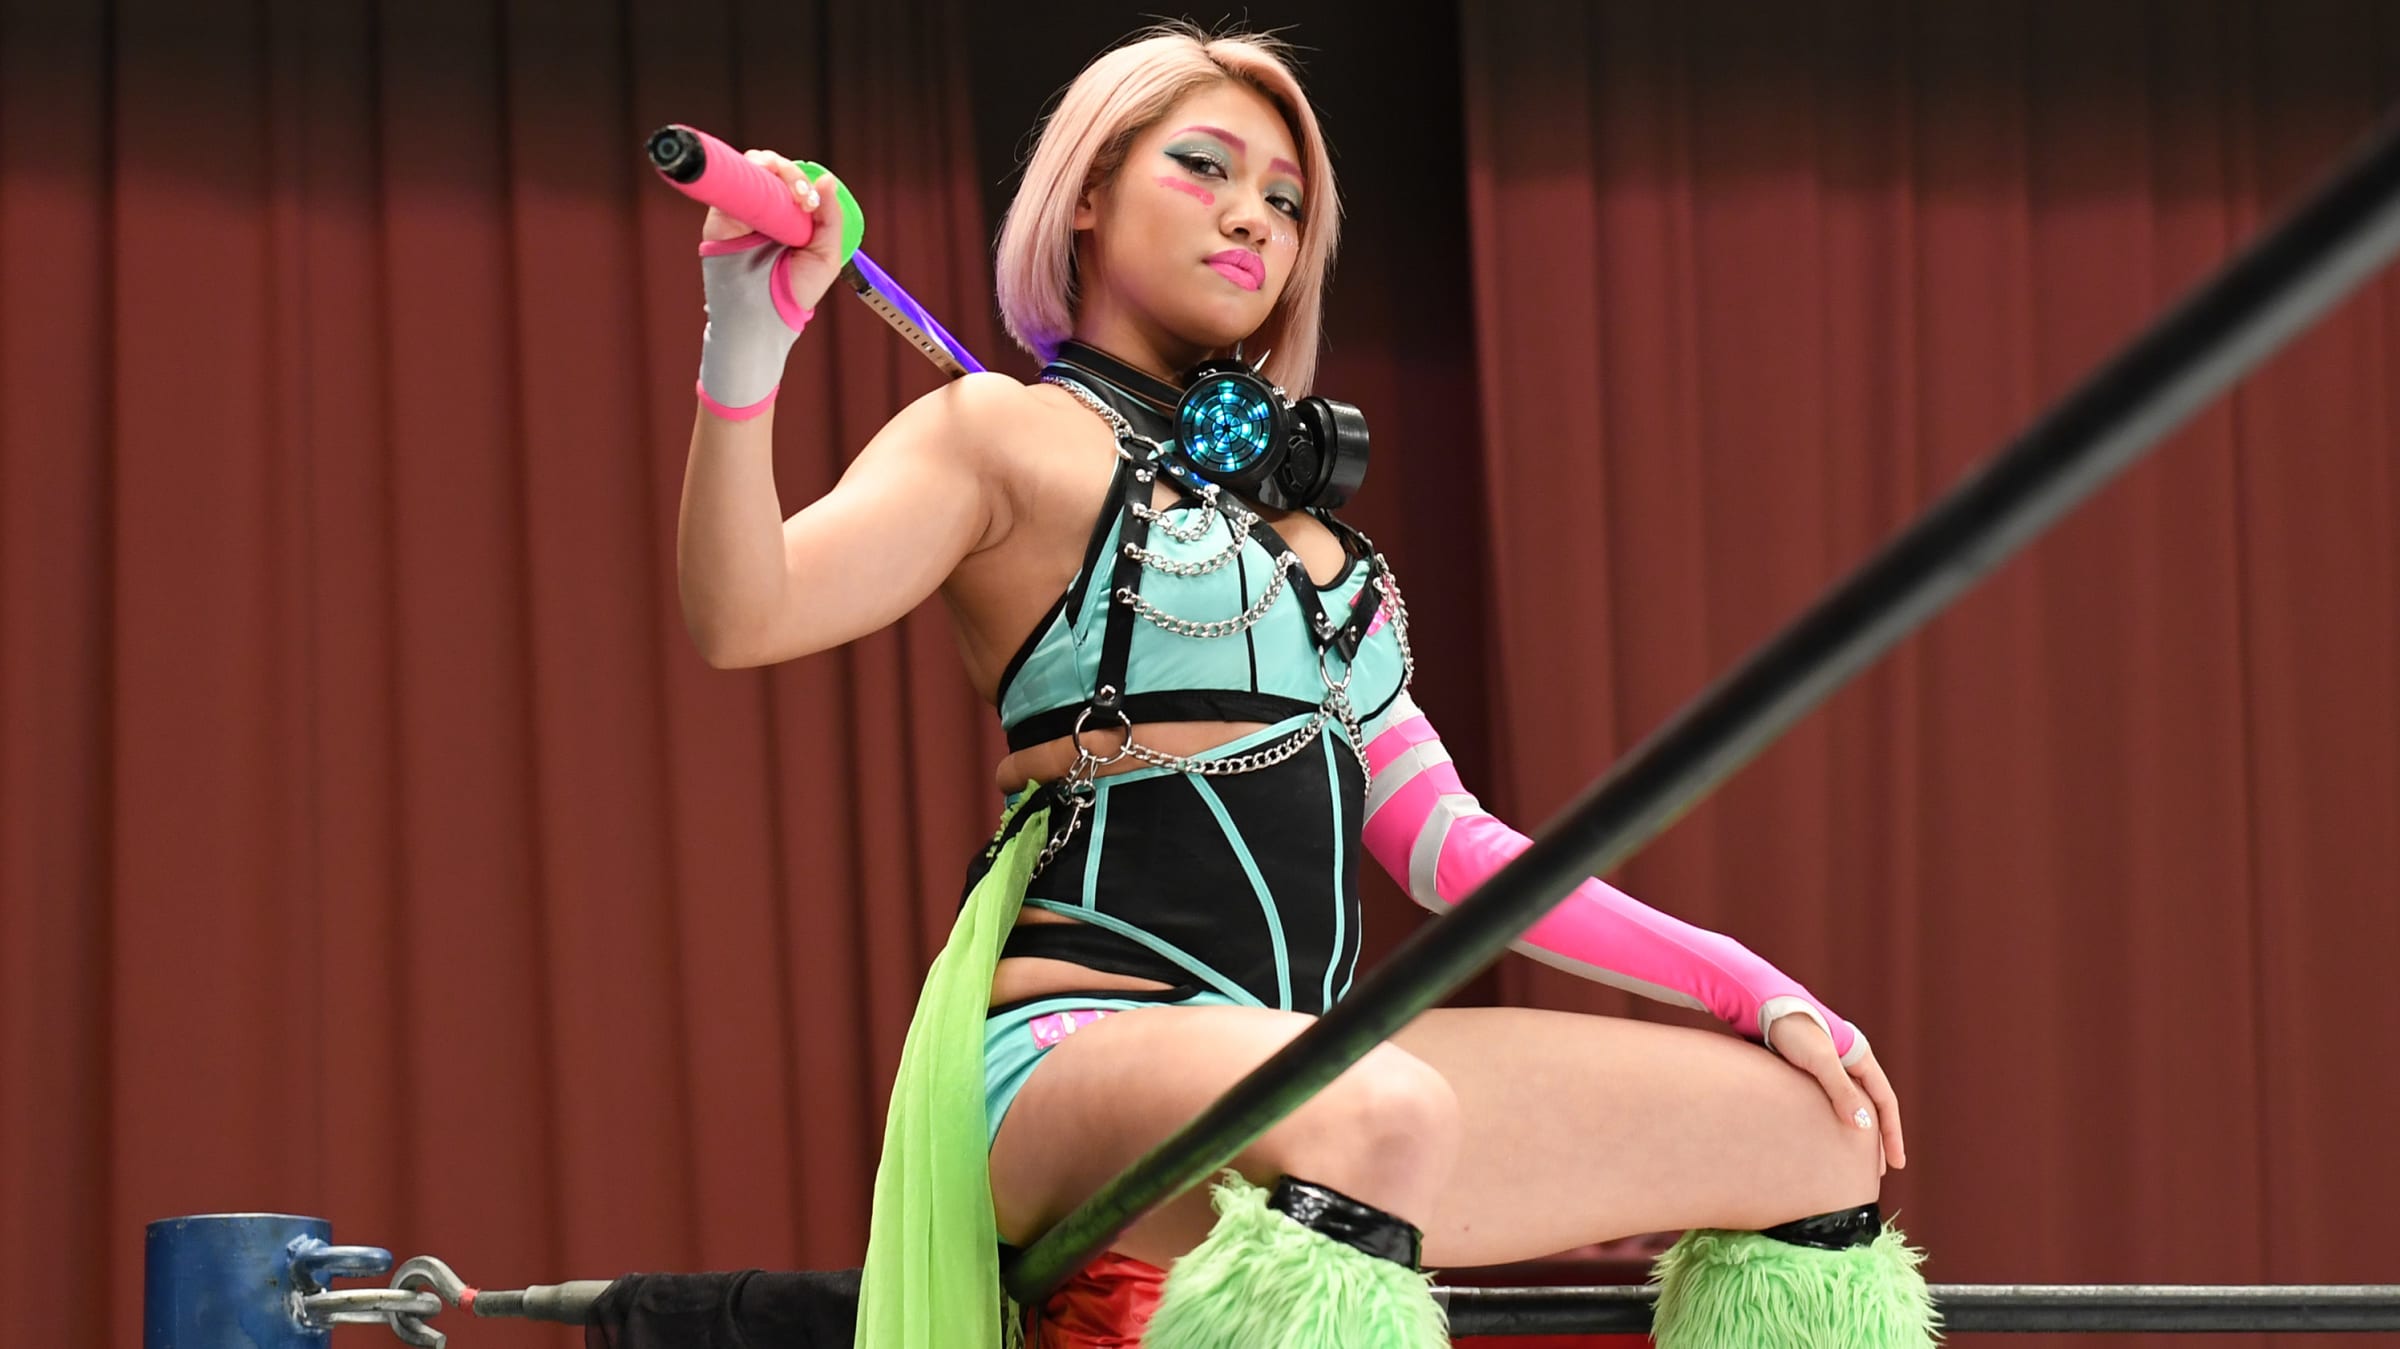 Chinese female wrestler debuts on WWE's top show - SHINE News